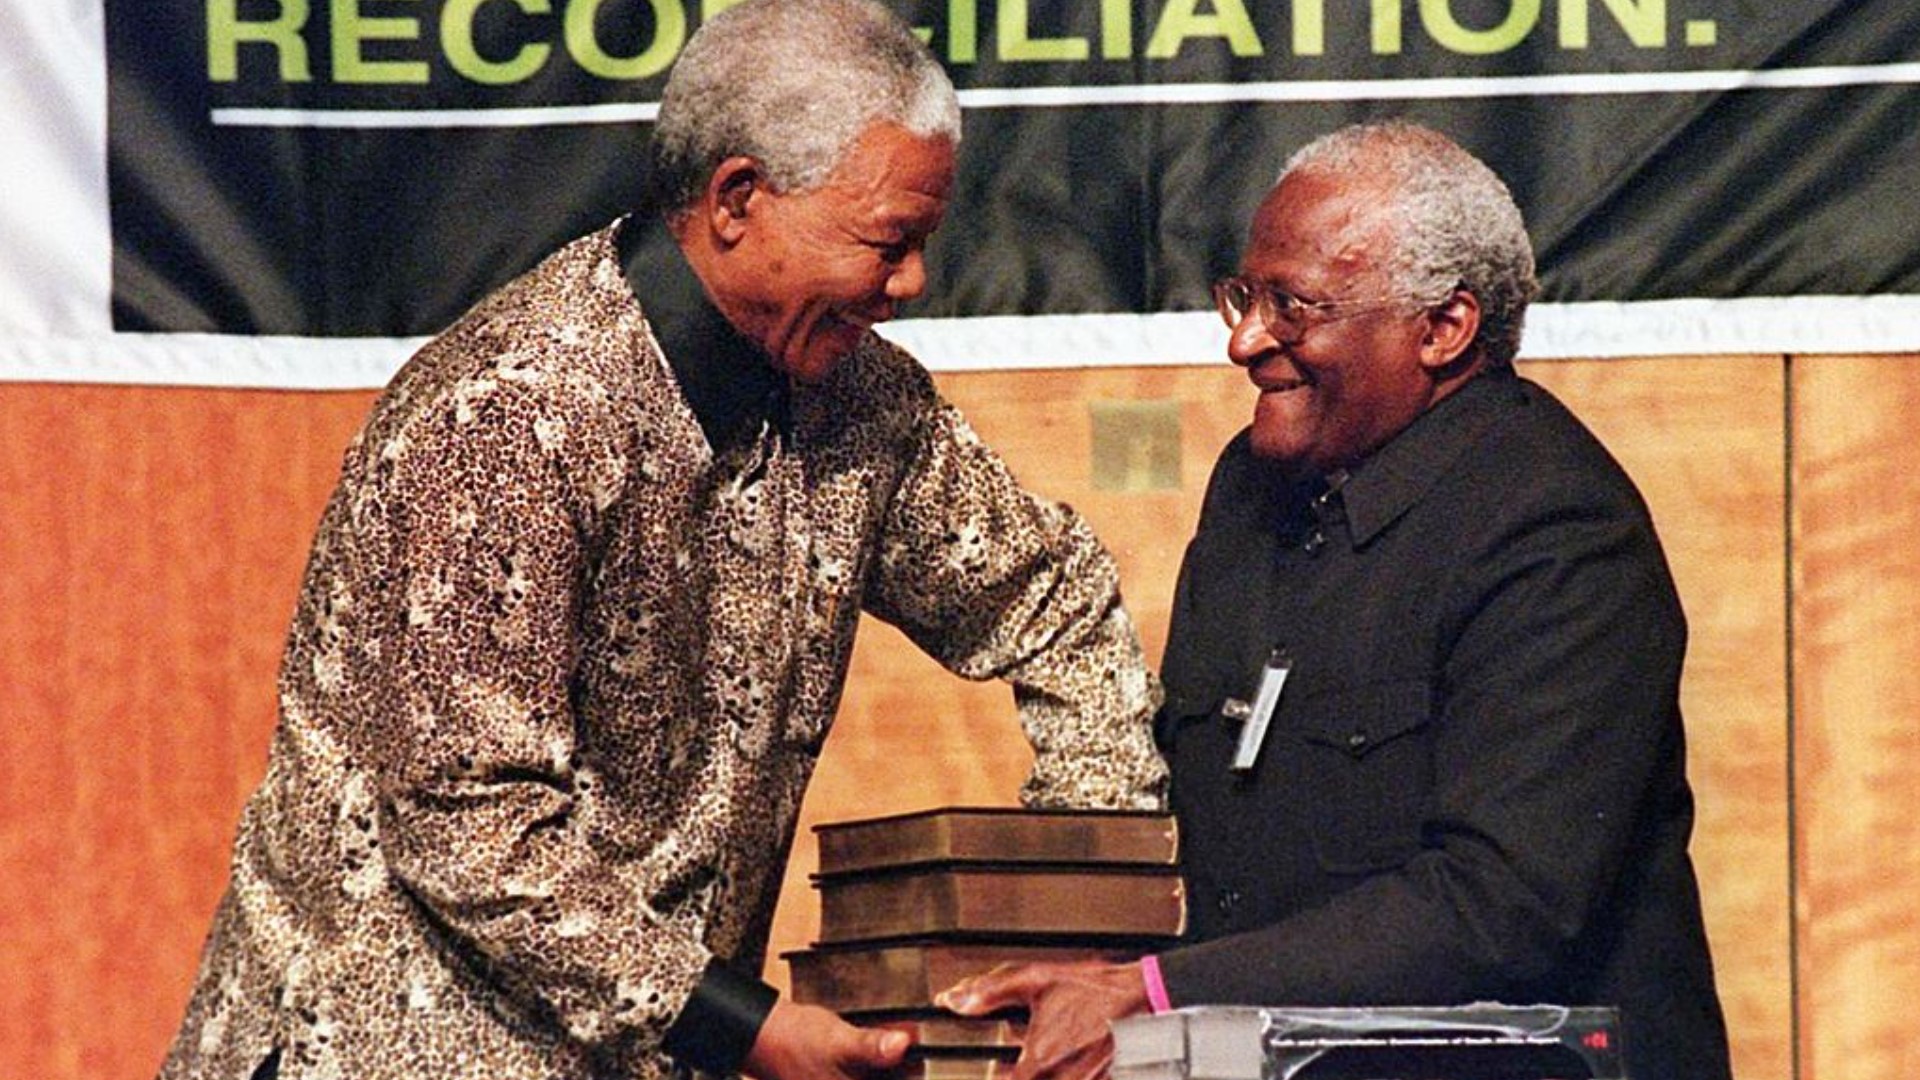 An uncompromising foe of apartheid, South Africa’s brutal regime of oppression against the Black majority, Desmond Tutu worked tirelessly for its downfall.